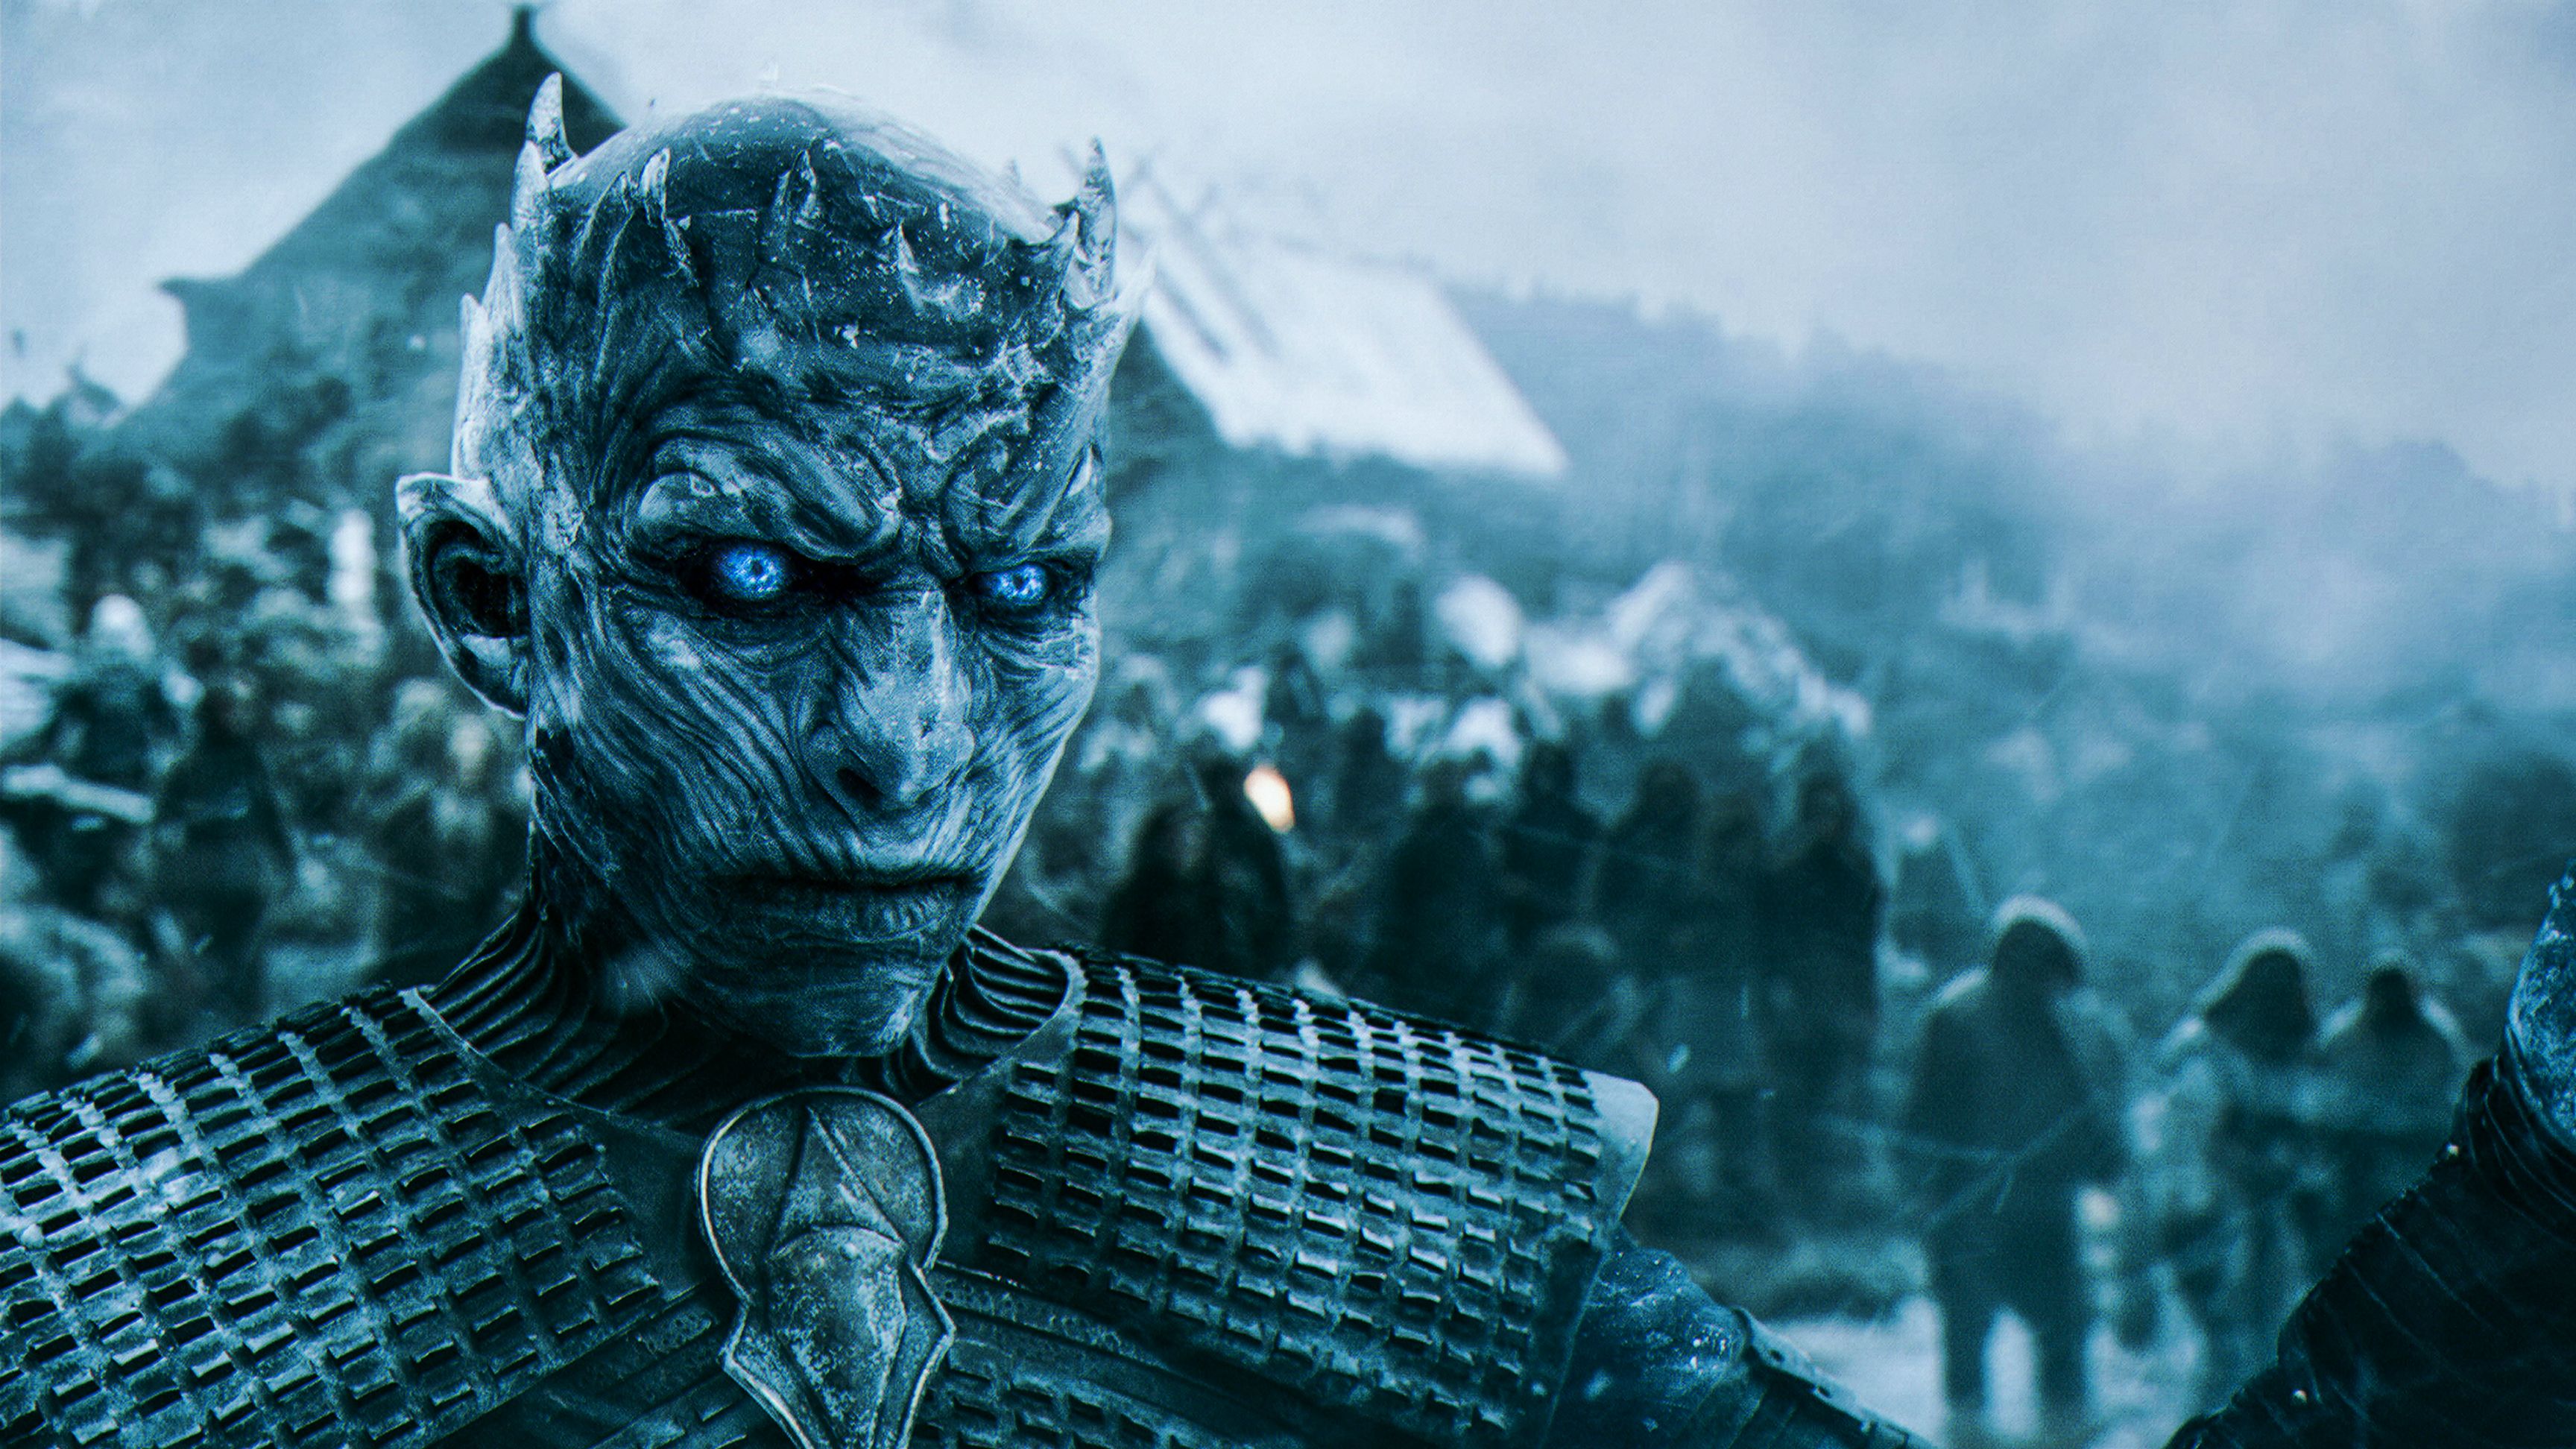 game of thrones, white walker, tv show, night king (game of thrones)